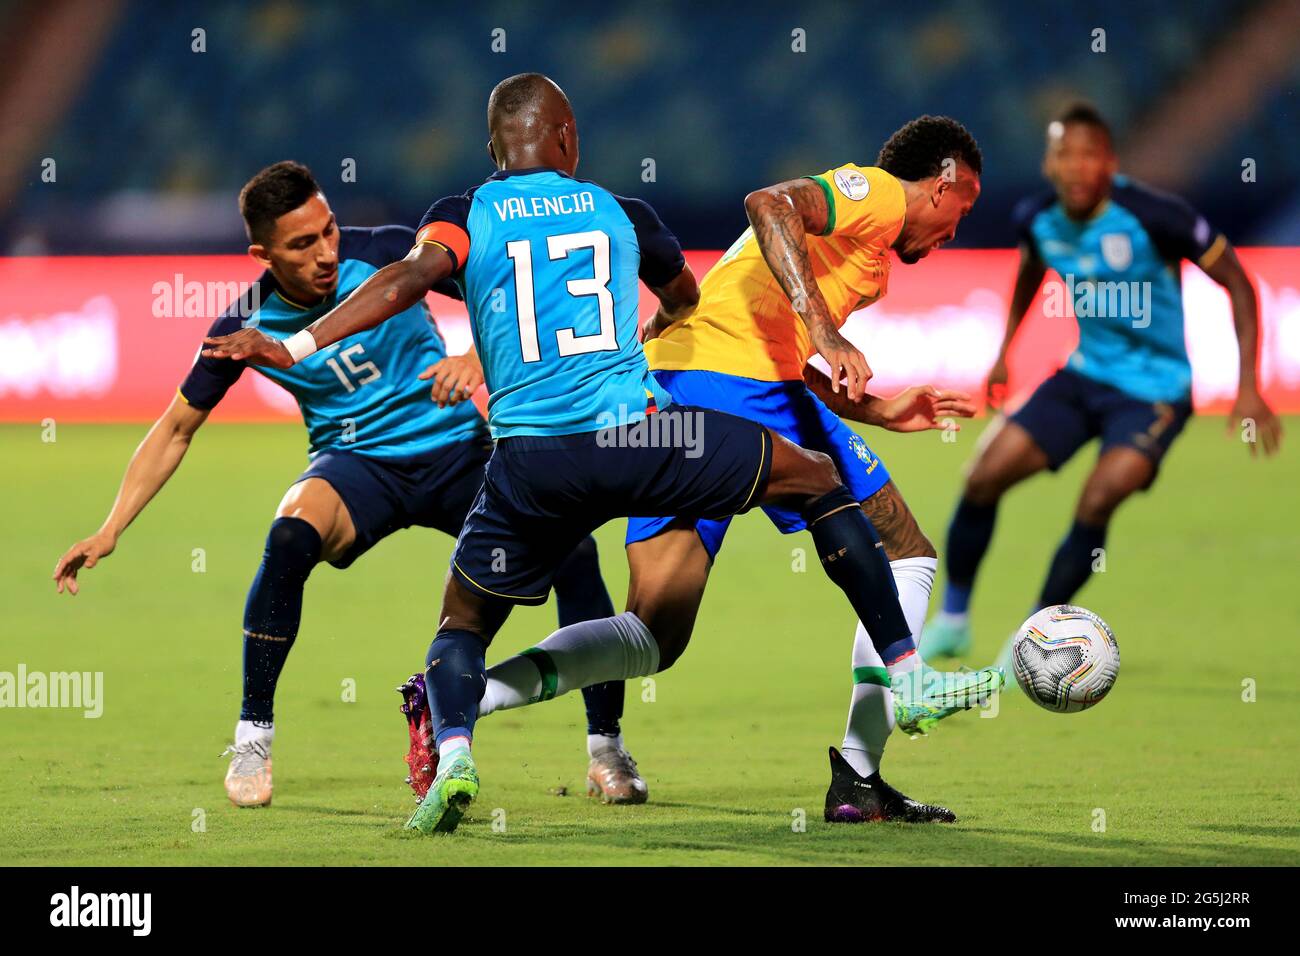 GOIANIA, BRAZIL - JUNE 27: Eder Militao of Brazil competes for the ball with Enner Valencia and Angel Mena of Ecuador ,during the match between Brazil and Ecuador as part of Conmebol Copa America Brazil 2021 at Estadio Olimpico on June 27, 2021 in Goiania, Brazil. (MB Media) Stock Photo